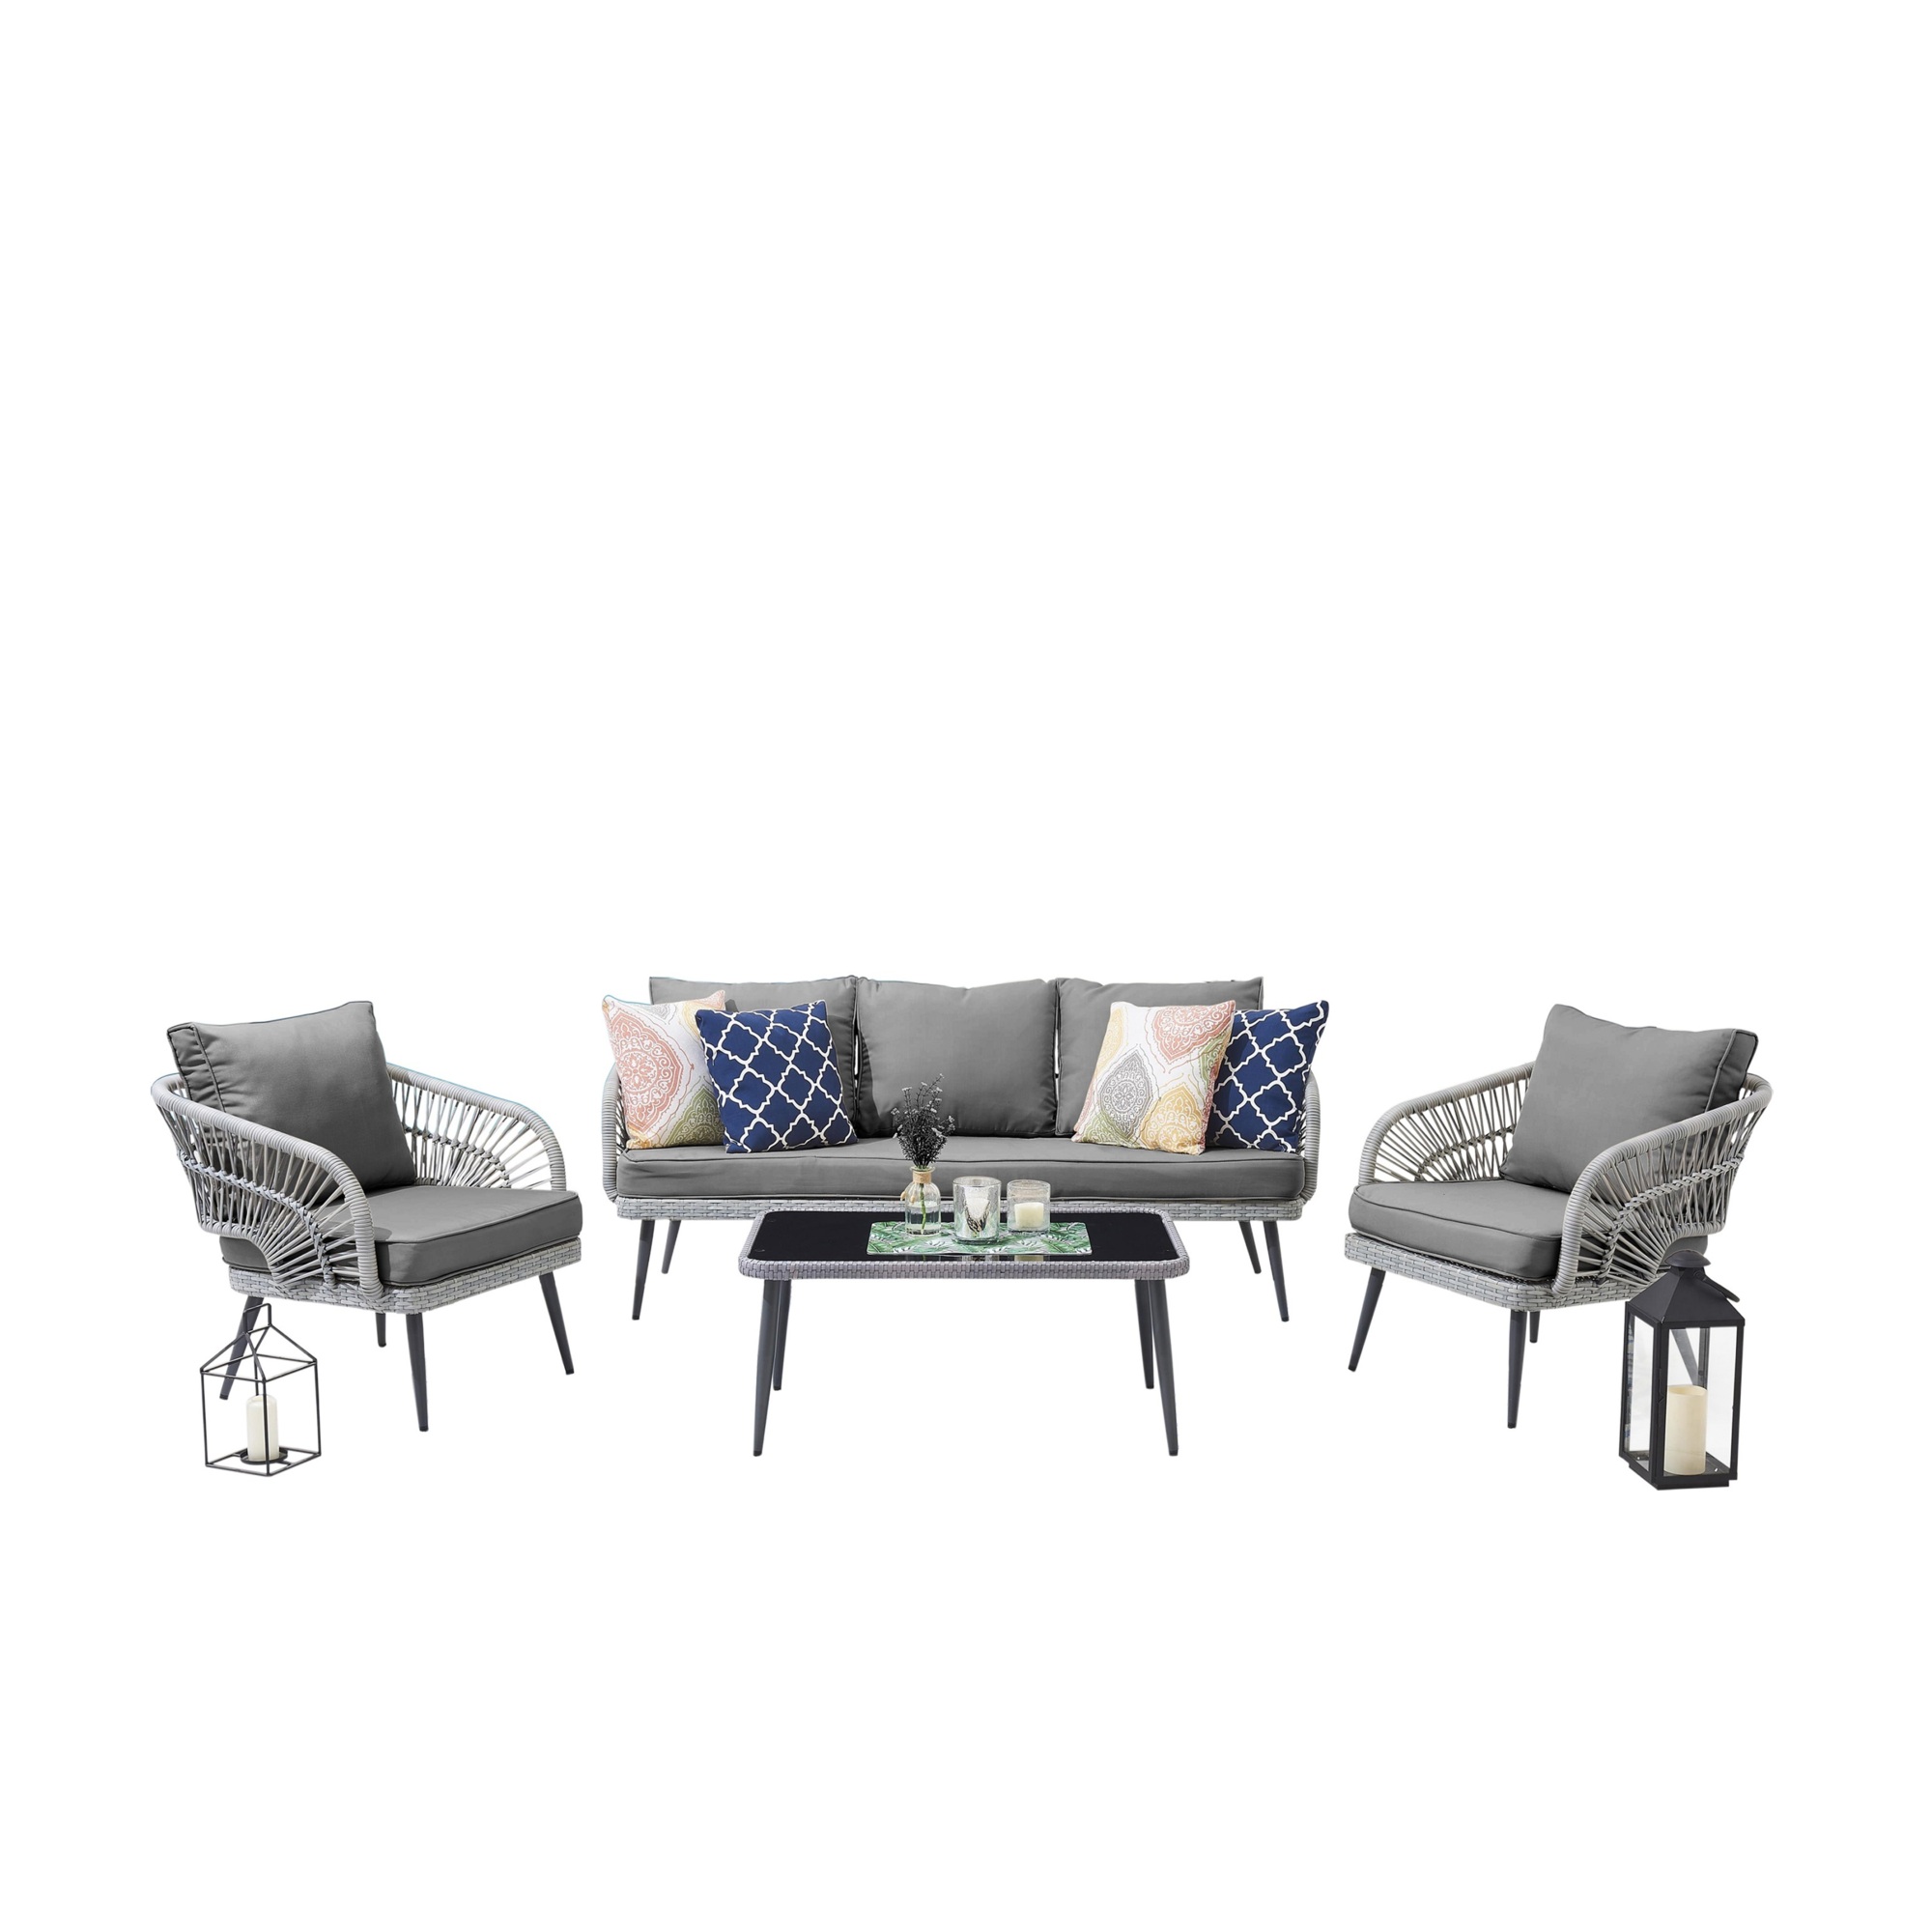 Manhattan Comfort, Riviera Rope 4Pc 5 Seater Patio Conv Set Cream, Pieces (qty.) 4 Primary Color Gray, Seating Capacity 5 Model OD-CV015